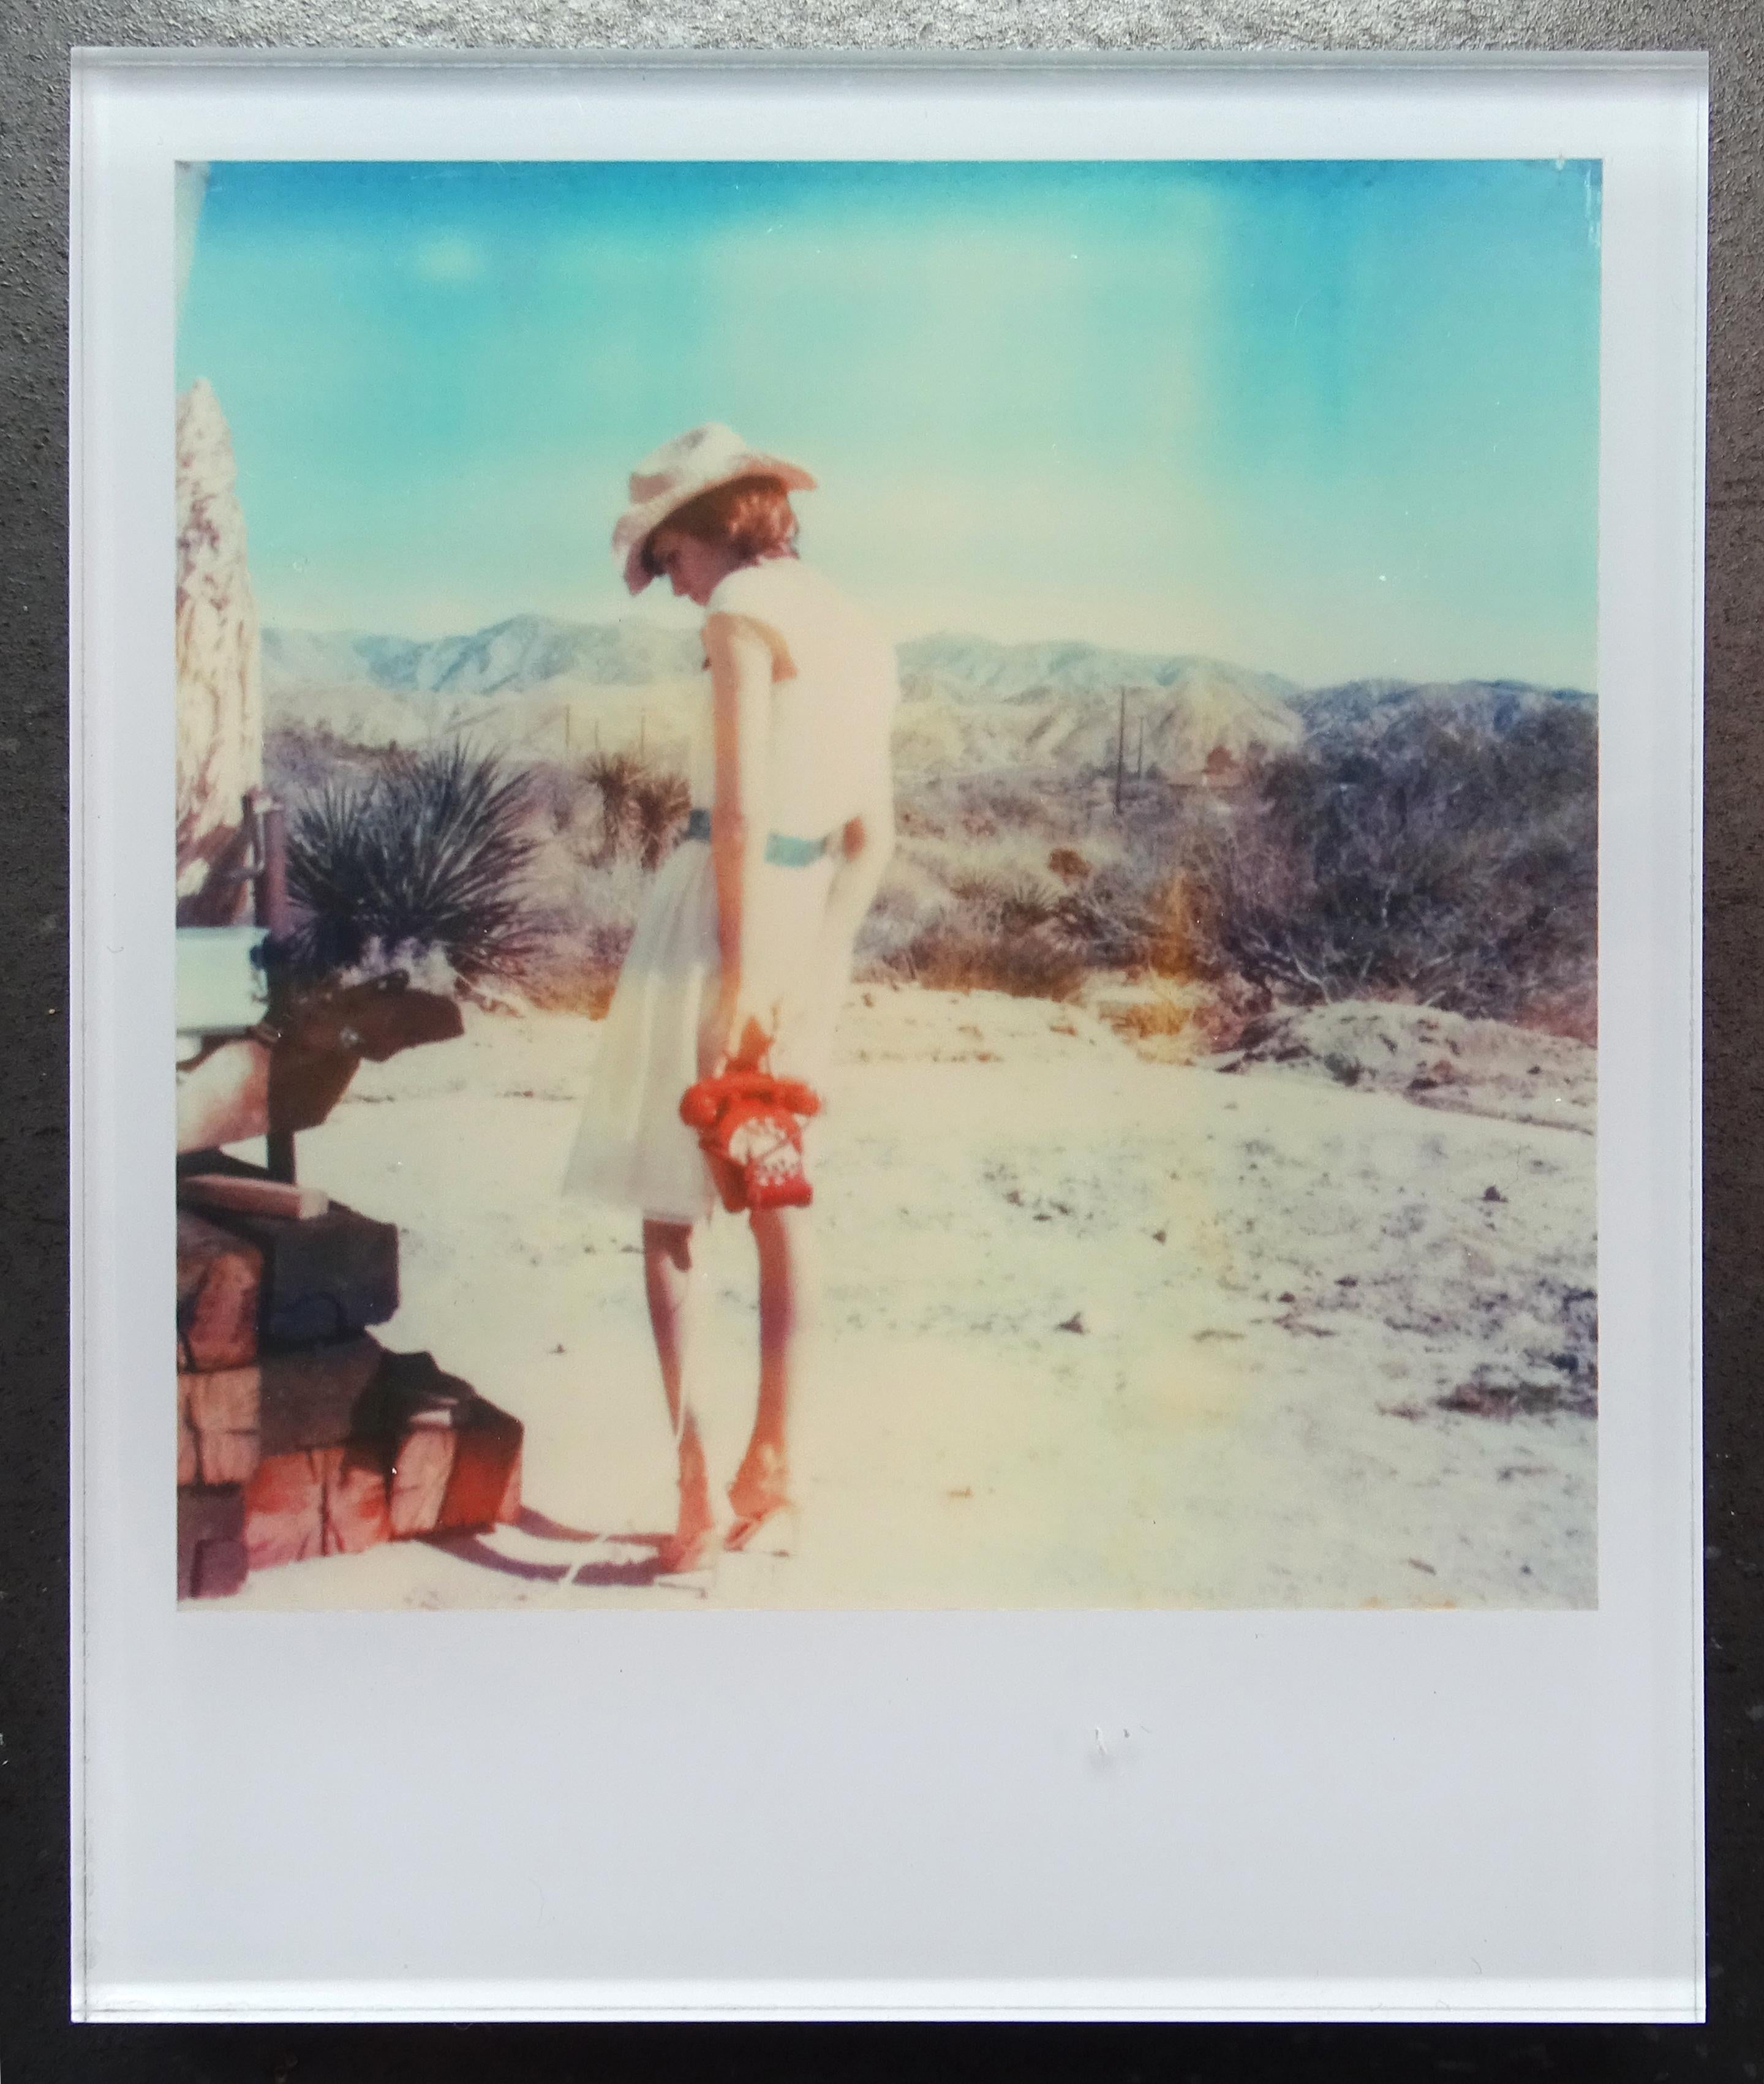 Stefanie Schneider's Minis
'Memories of Love' (The Girl behind the White Picket Fence), 2013
signed and signature brand on verso
Lambda digital Color Photographs based on a Polaroid

Polaroid sized open Editions 1999-2013
10.7 x 8.8cm (Image